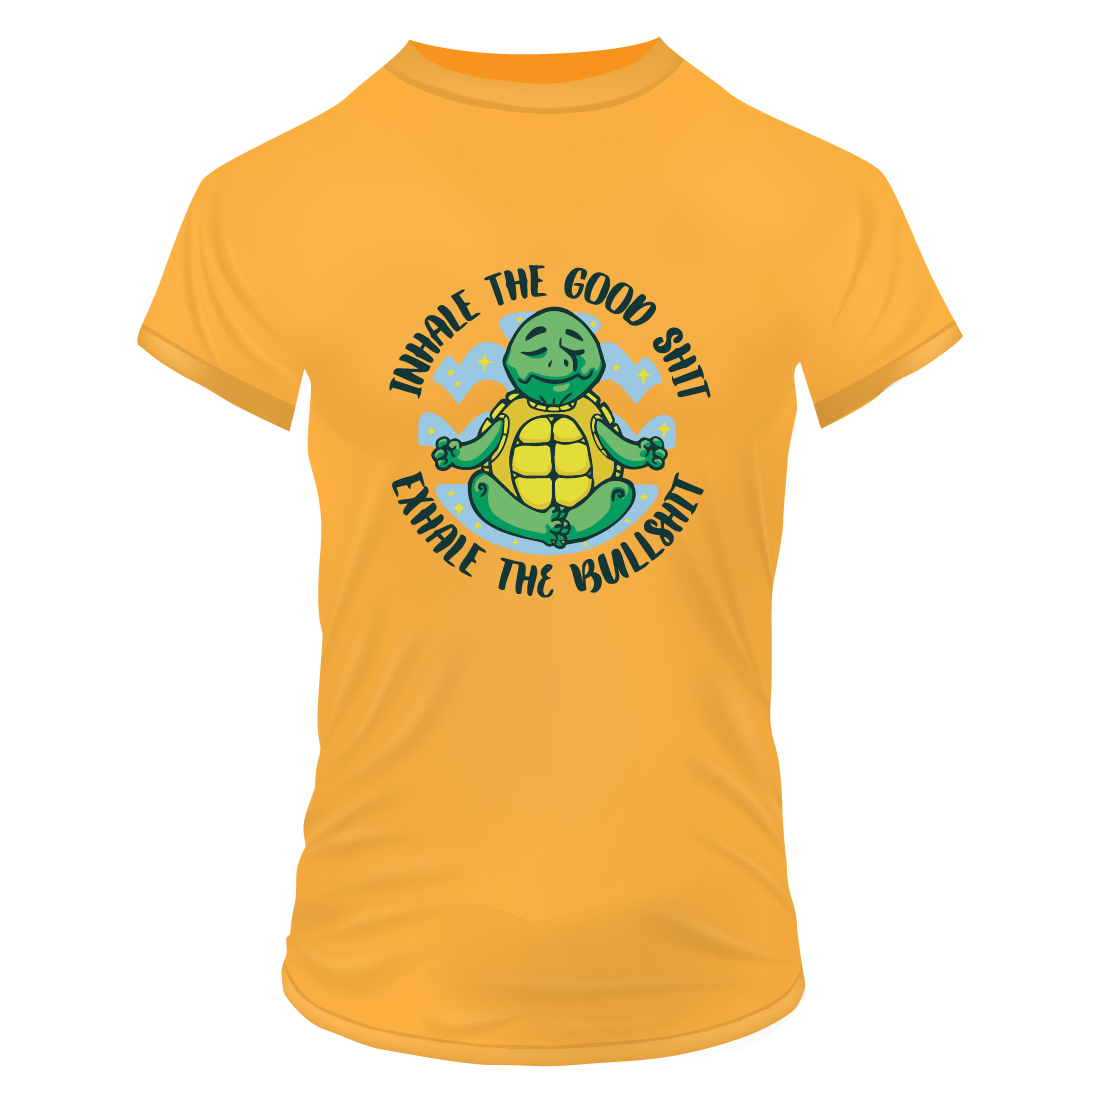 Inhale the good shit, exhale the bullshit Funny quote meditating turtle Vector illustration T-shirt Design cover image.